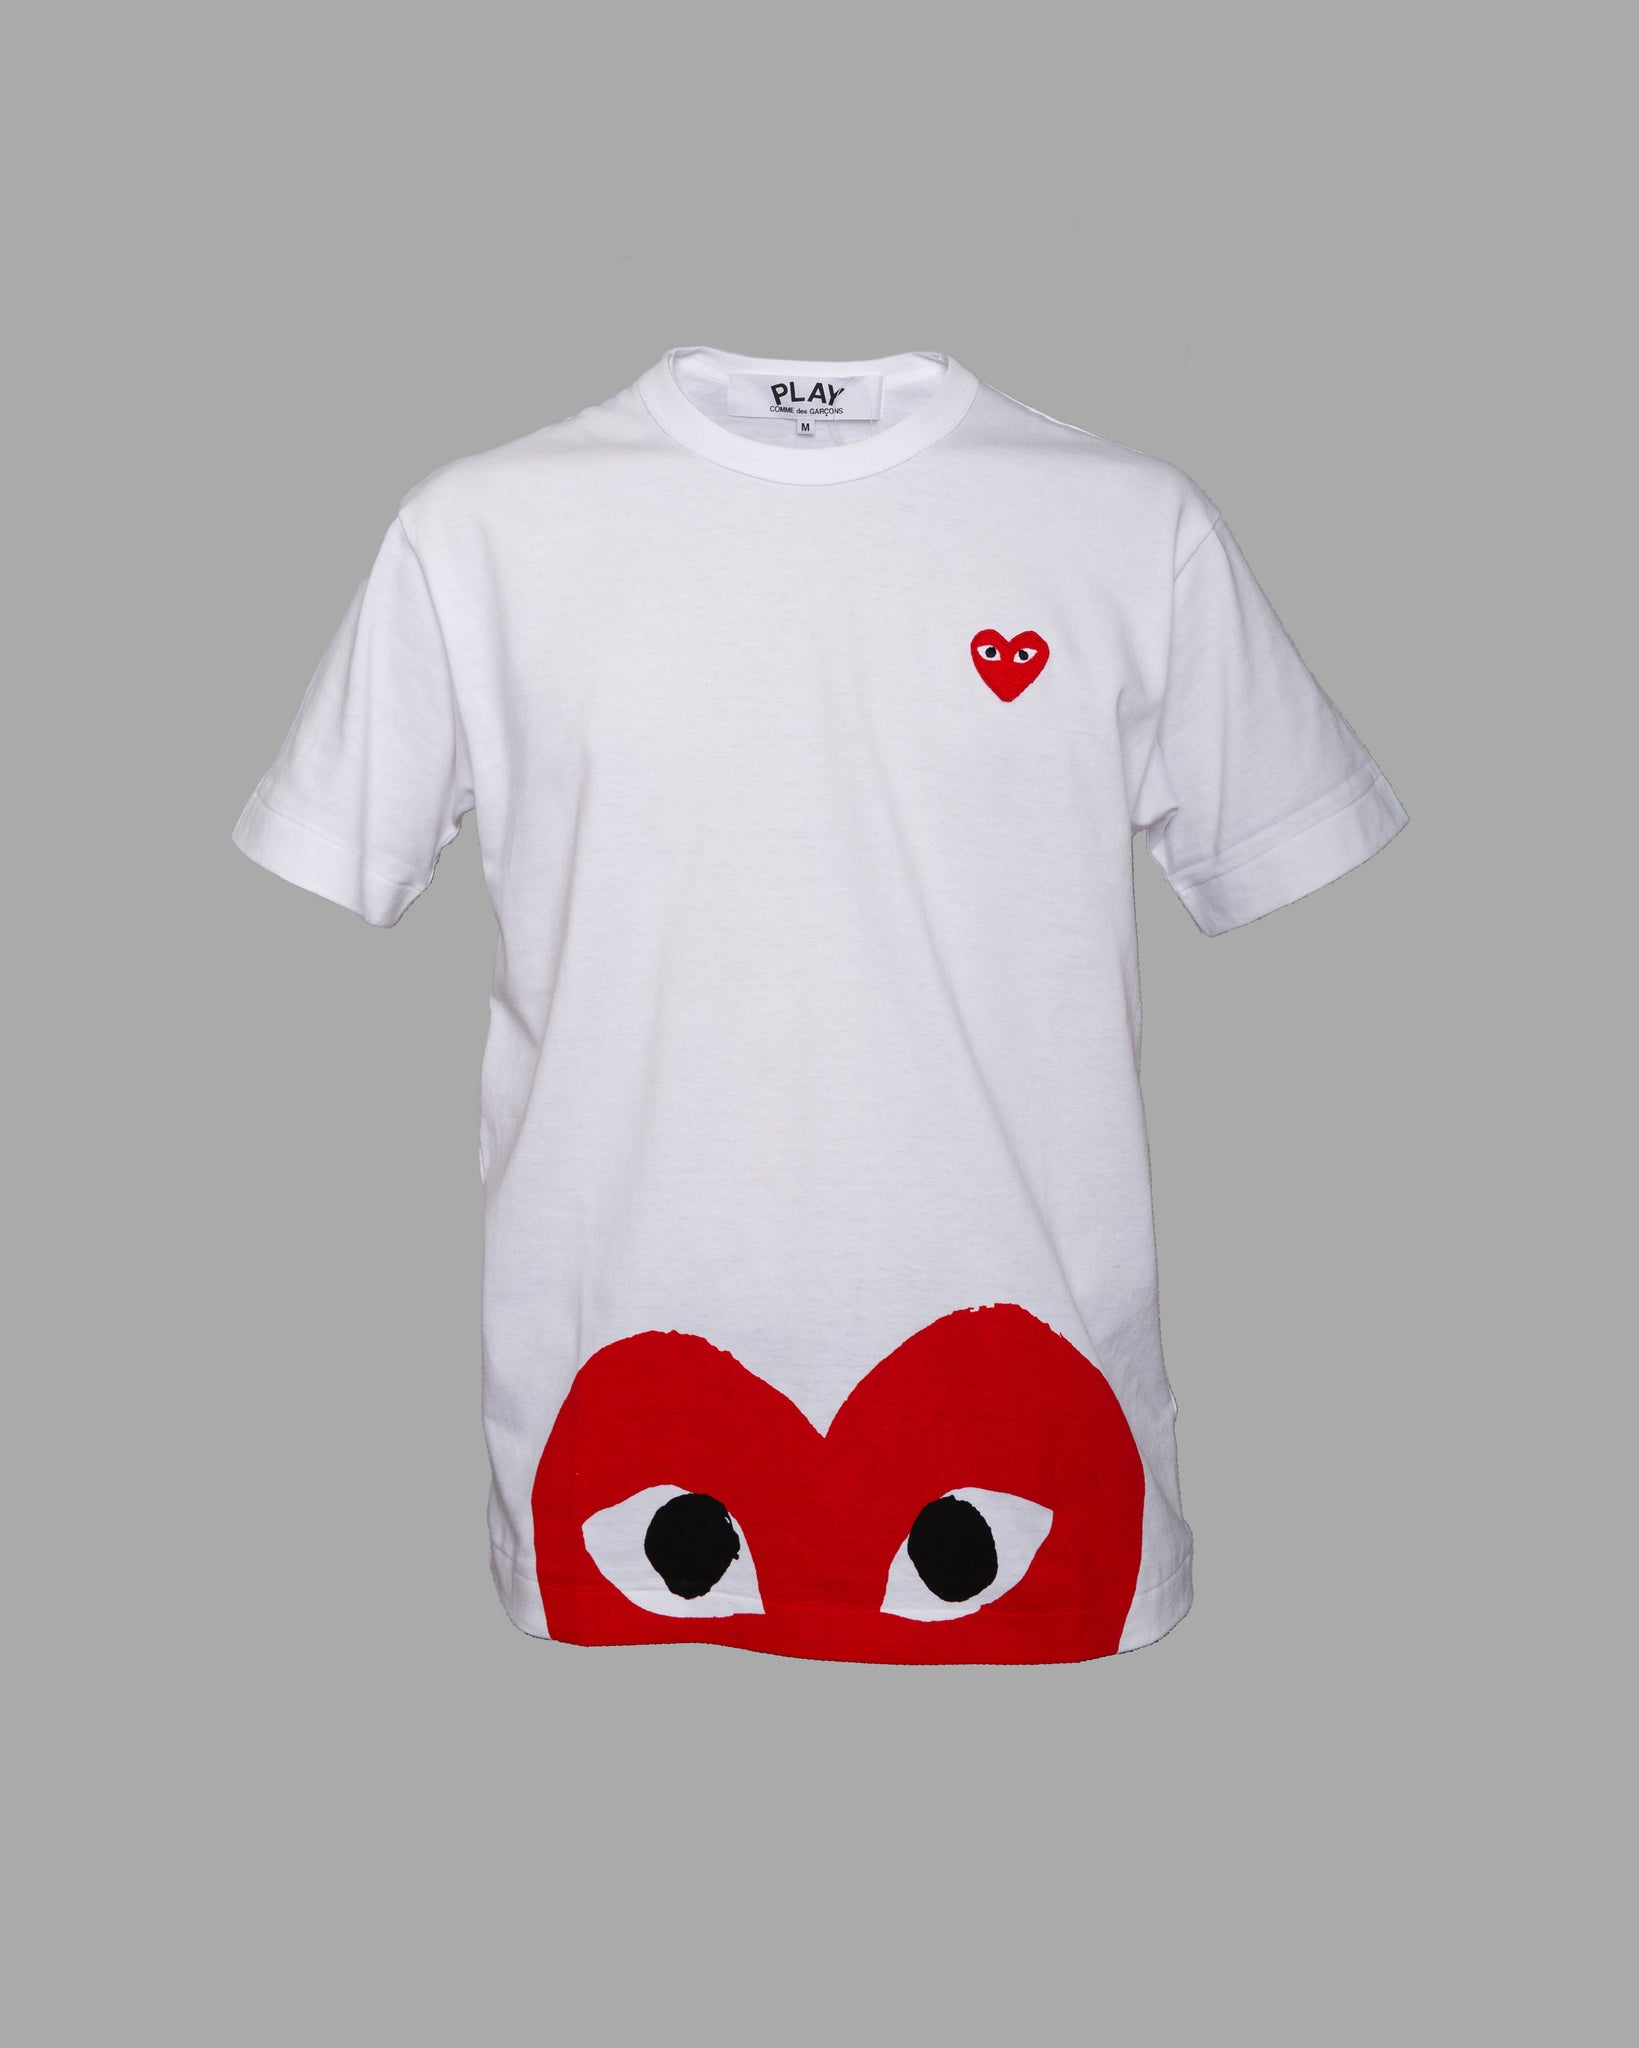 white t shirt with red hearts